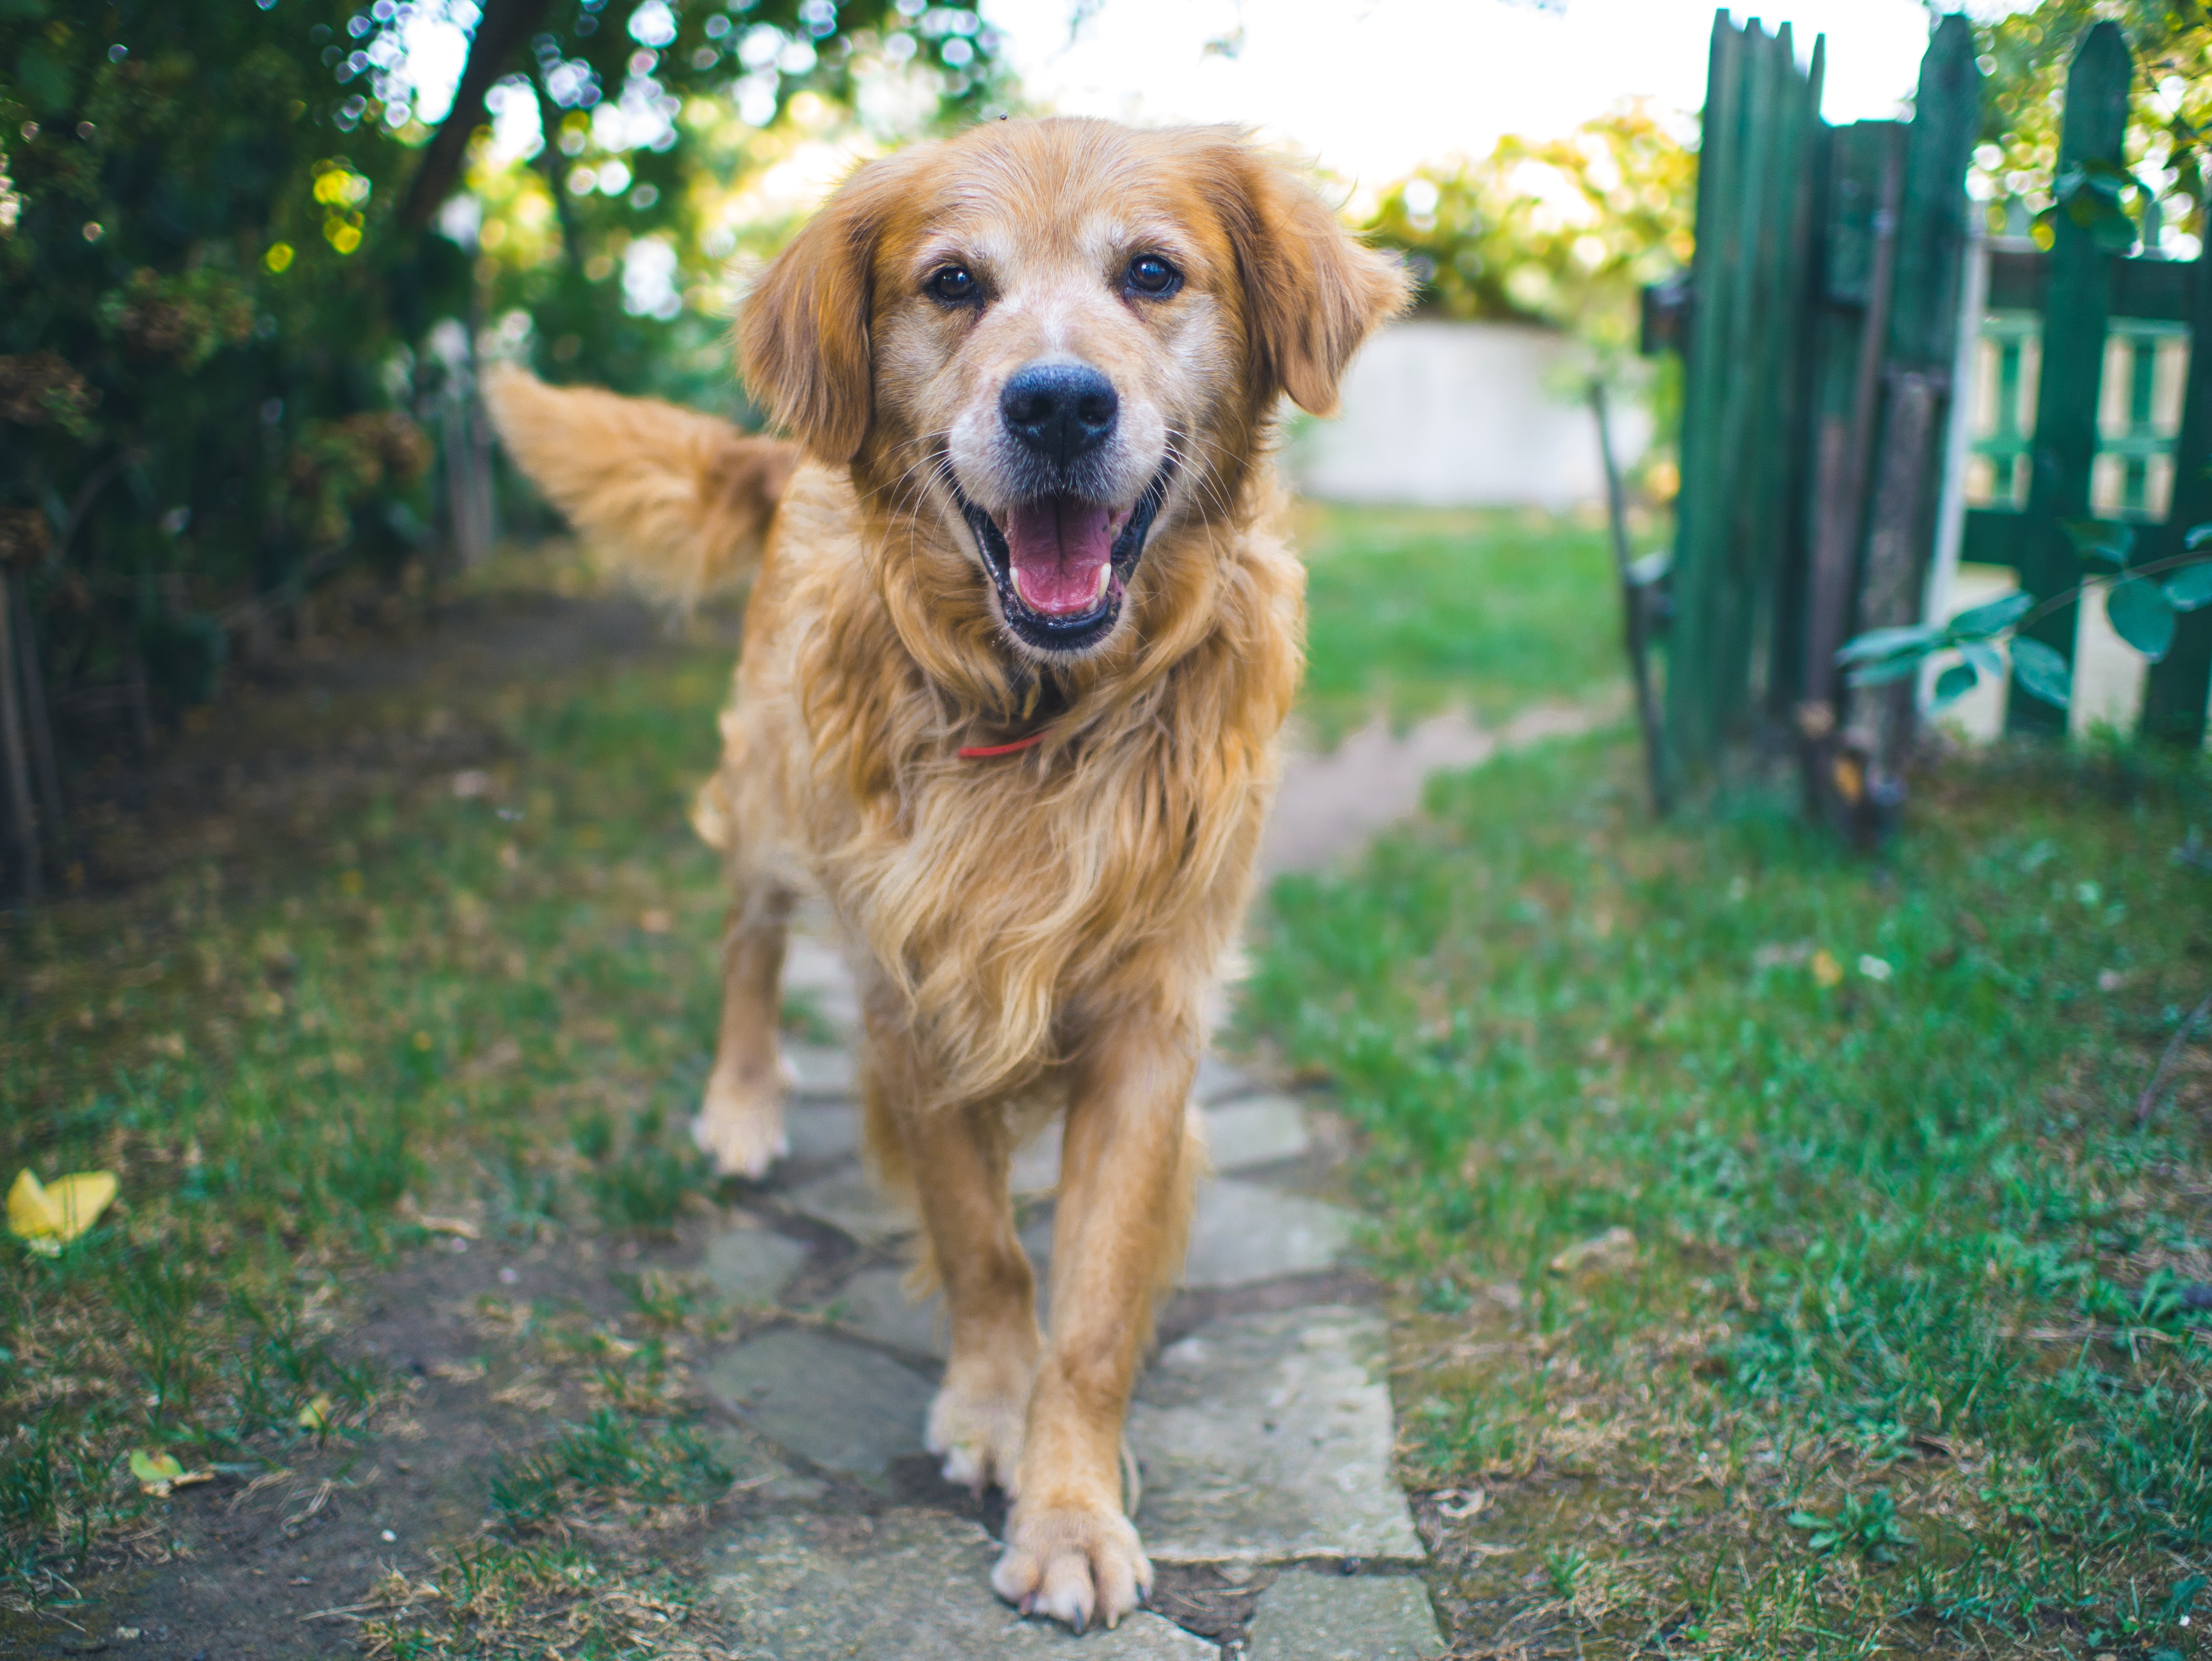 Even the friendliest of pooches can scare away unwanted visitors to your garden!